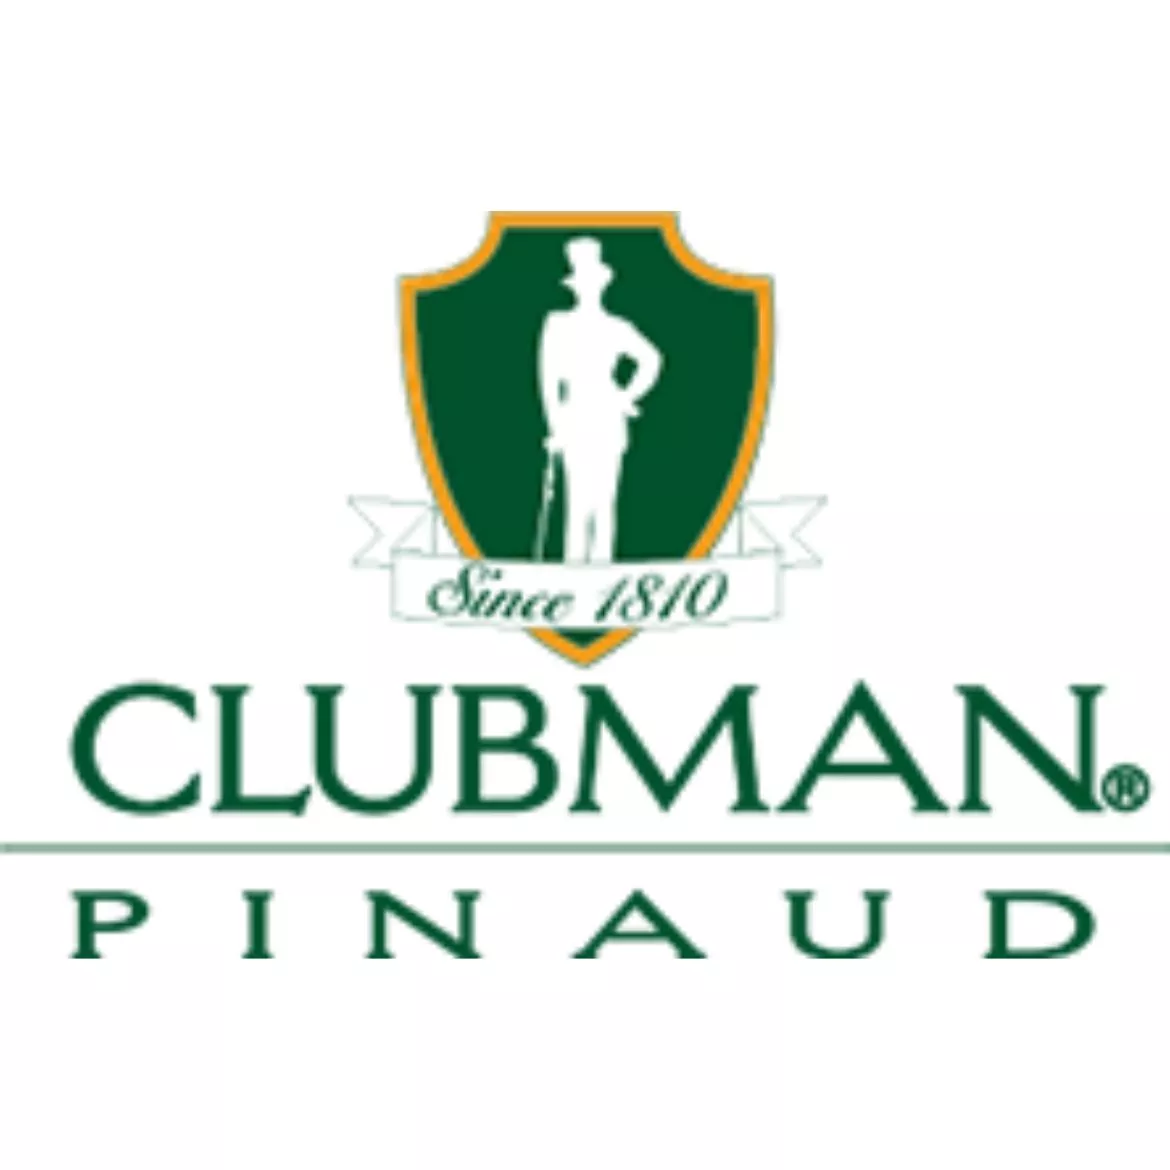 Clubman Pinaud Mens Grooming Products